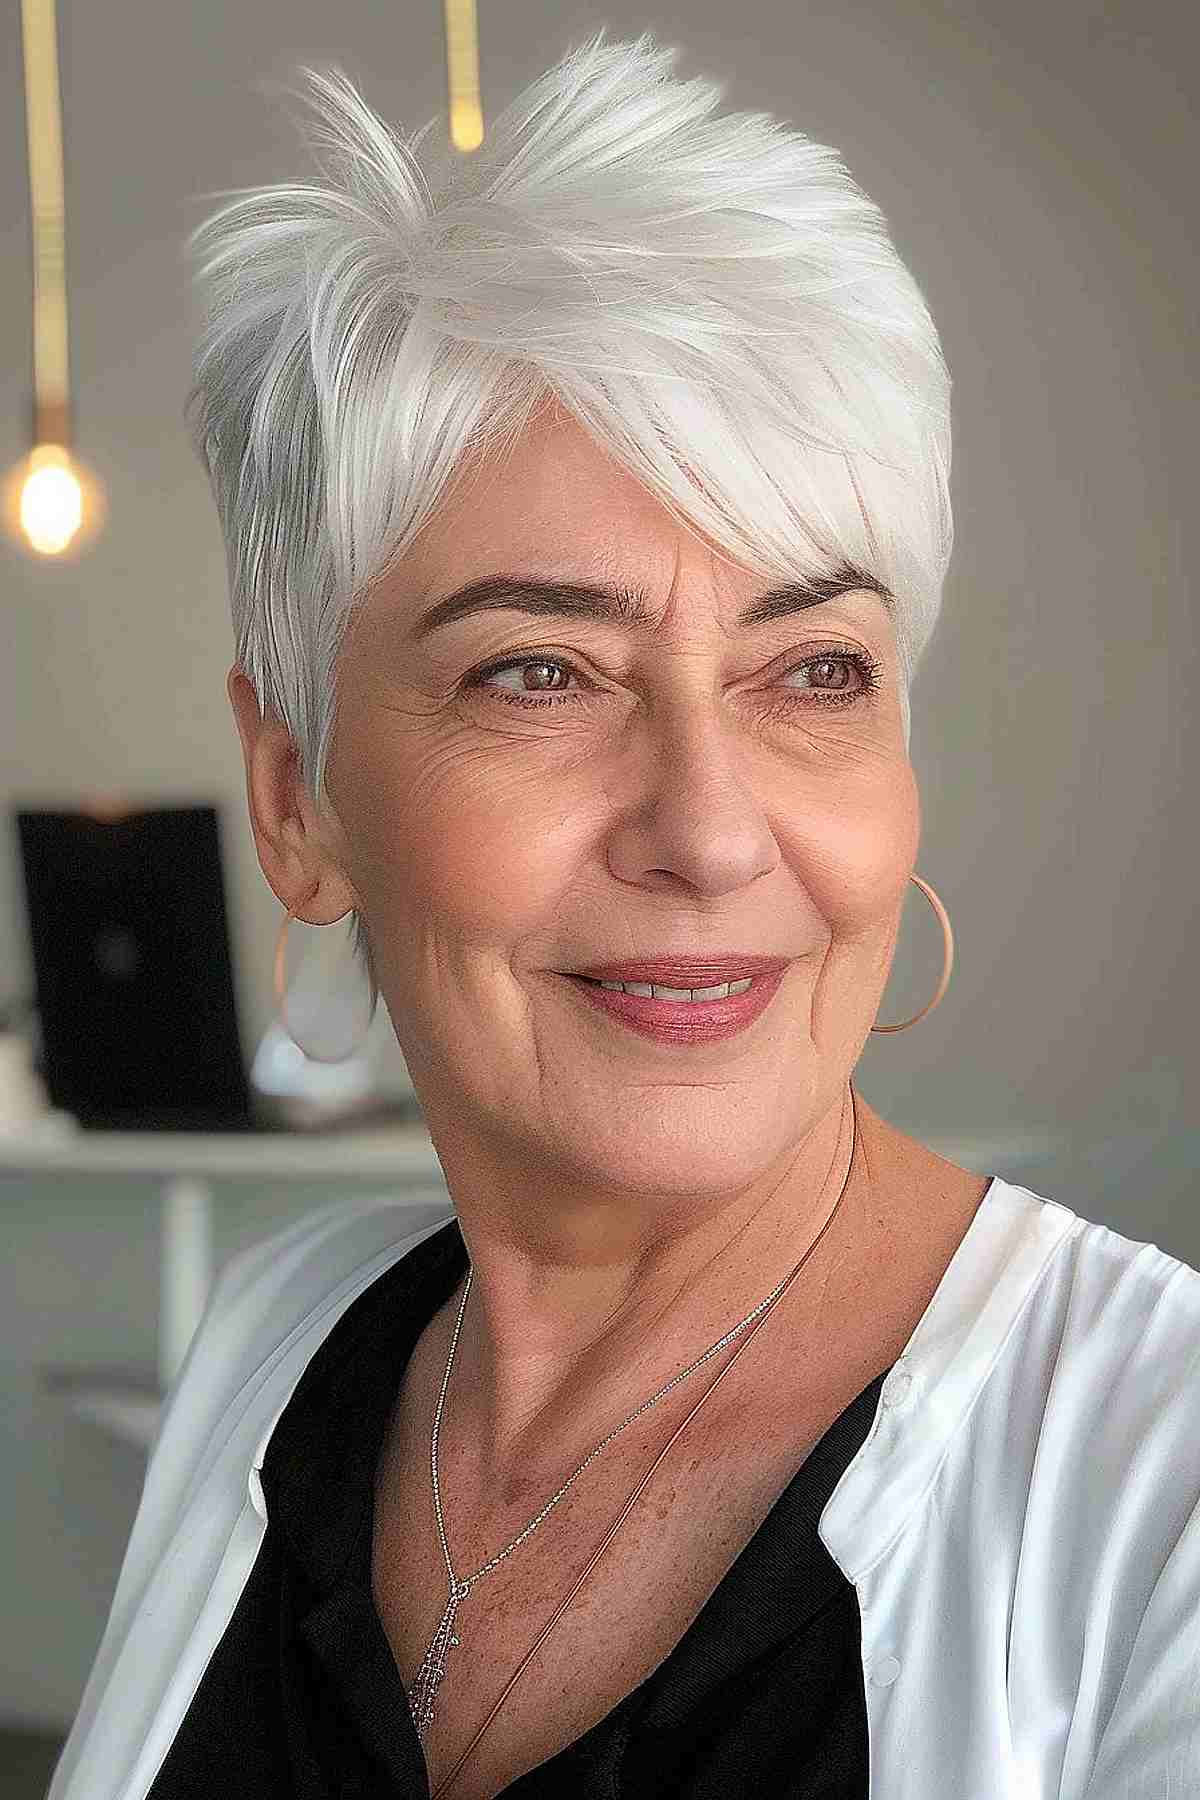 Super short crop pixie hairstyle for older women with white hair